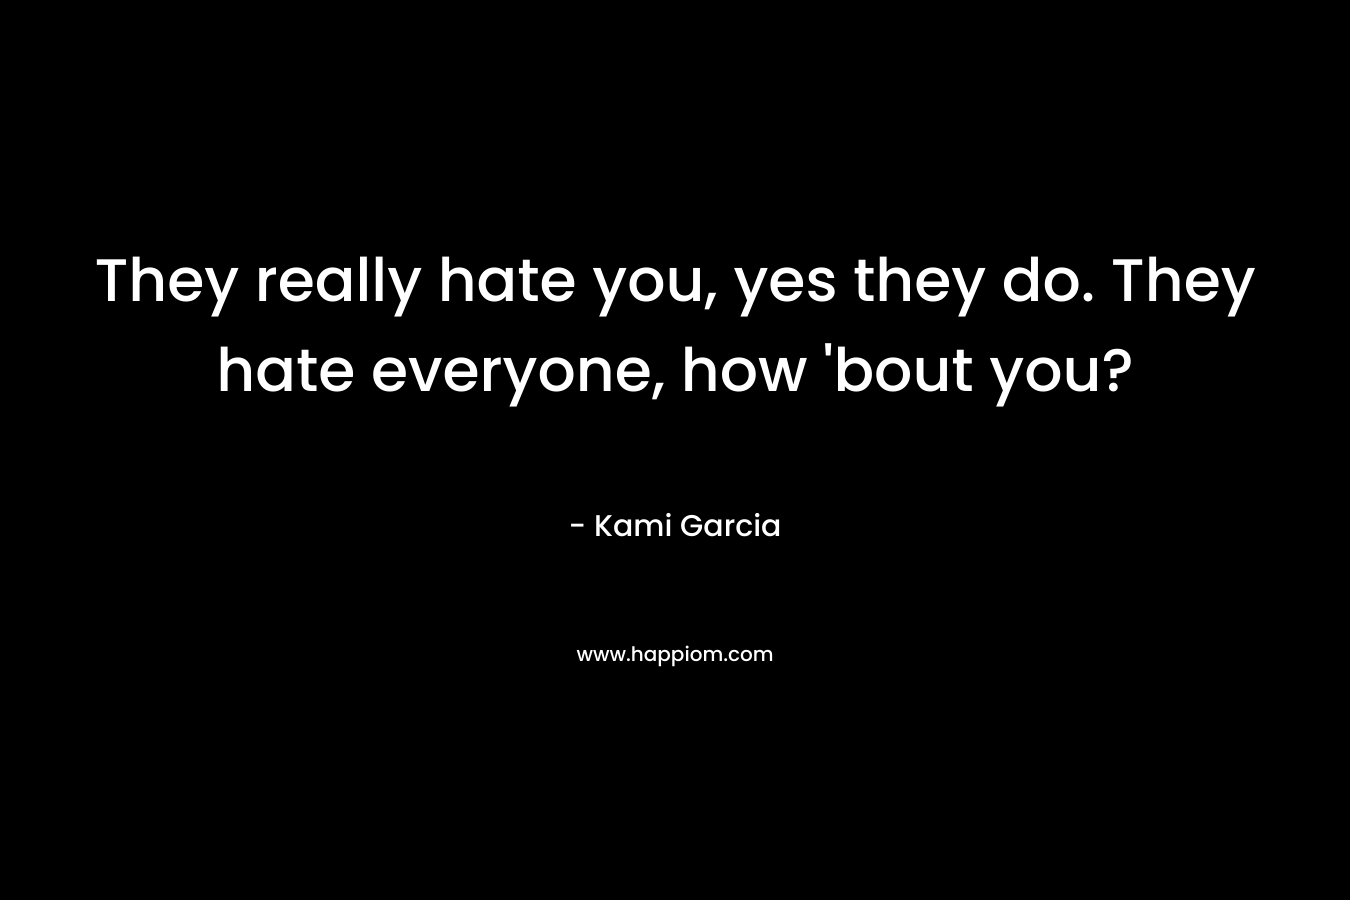 They really hate you, yes they do. They hate everyone, how 'bout you?